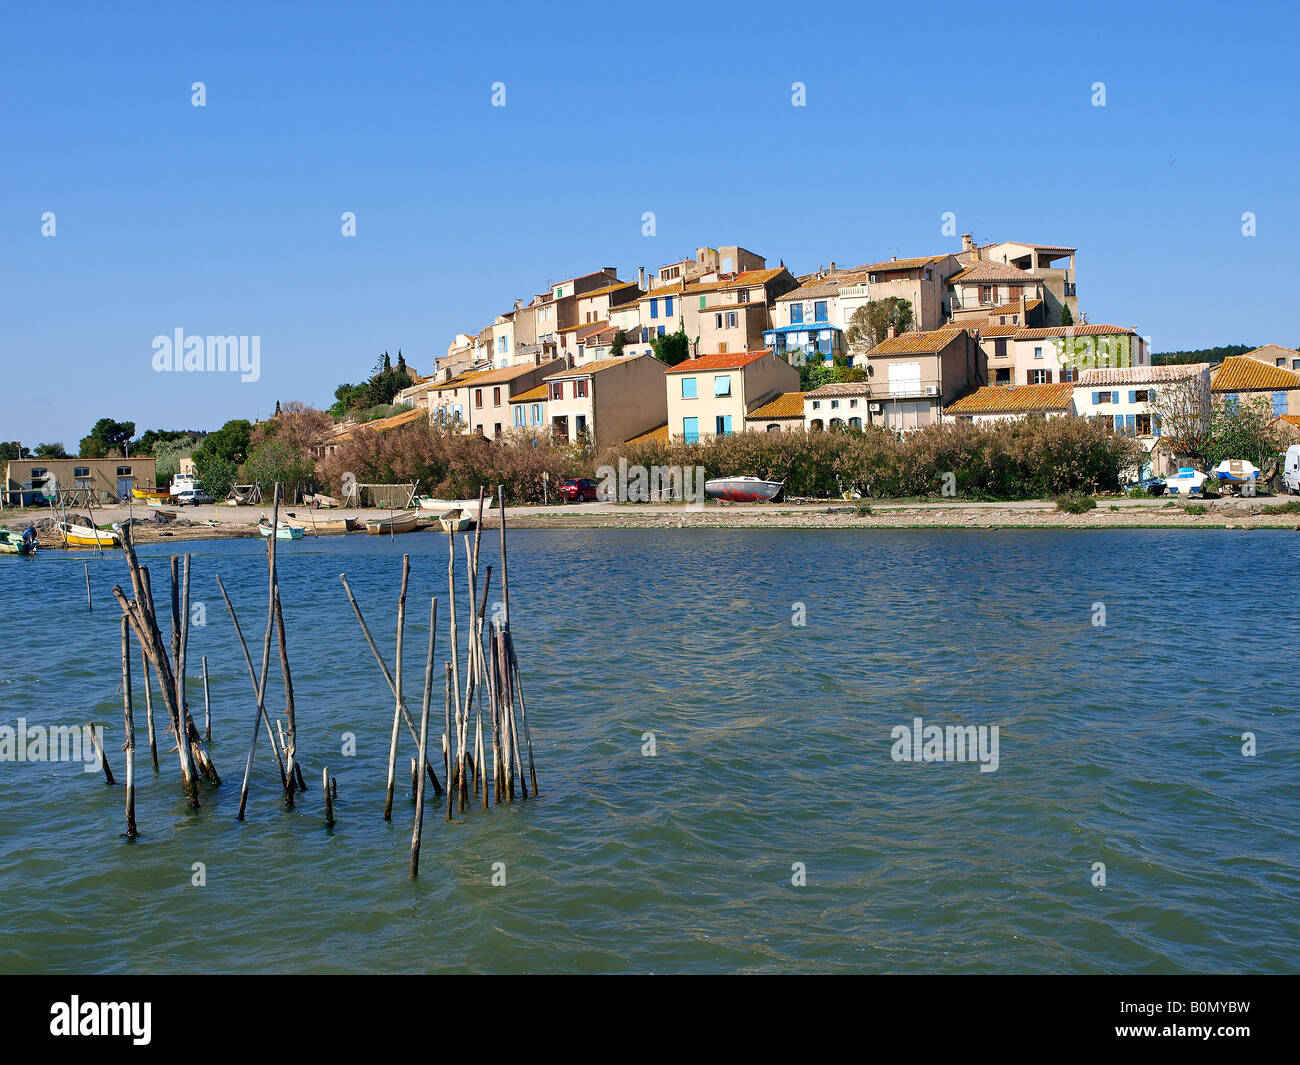 Bages, Languedoc Roussillon, Frankreich. Stockfoto